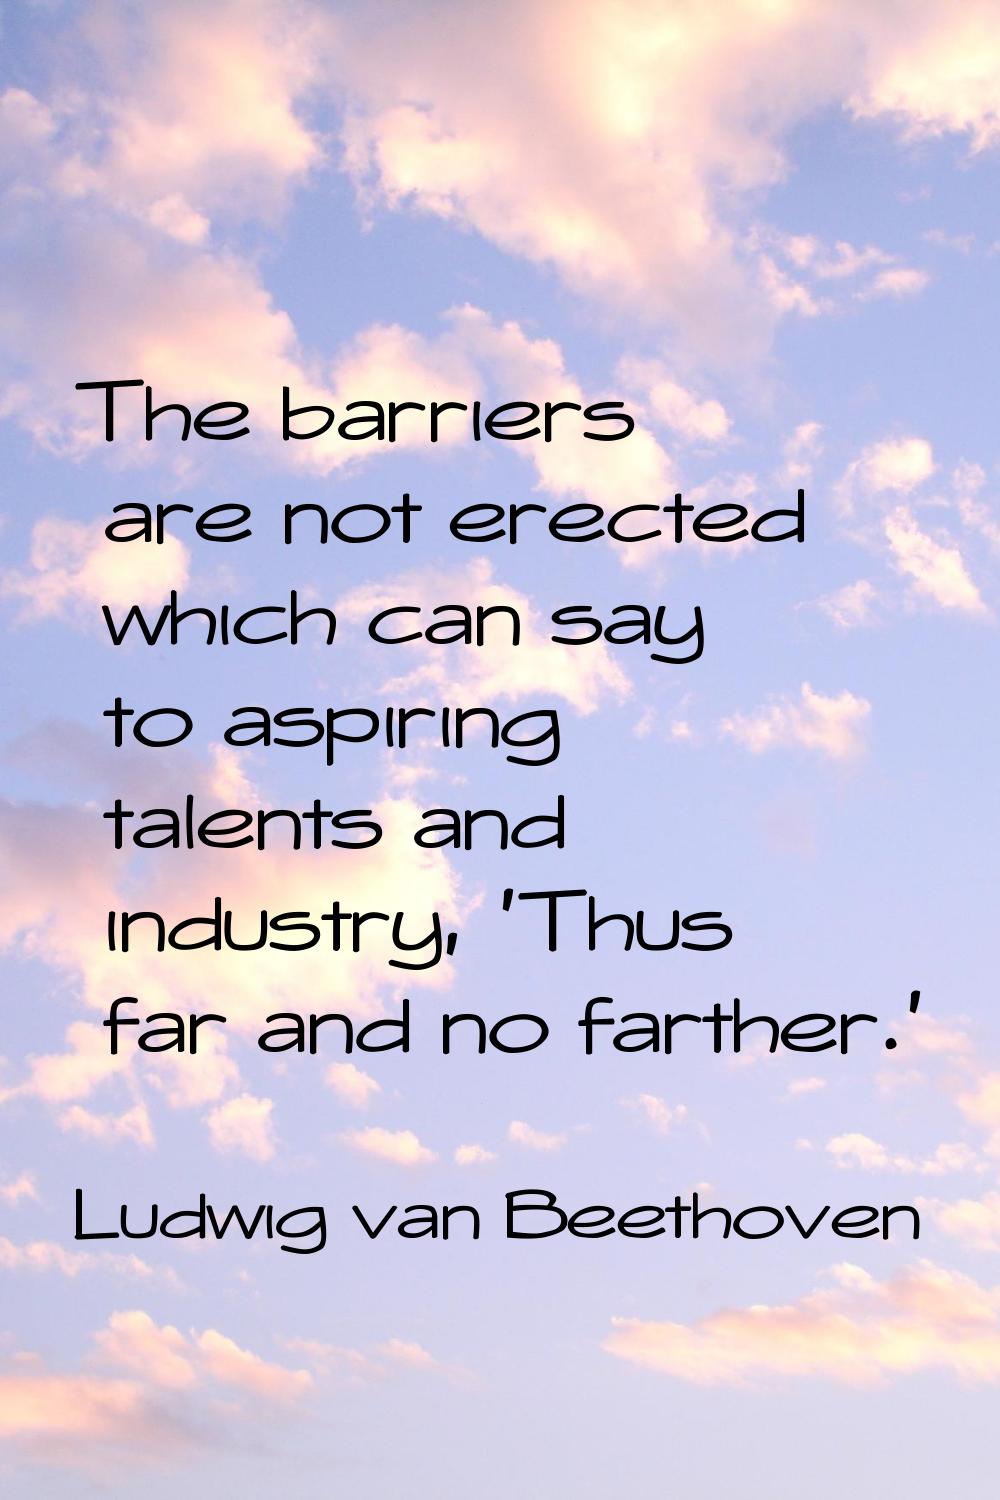 The barriers are not erected which can say to aspiring talents and industry, 'Thus far and no farth